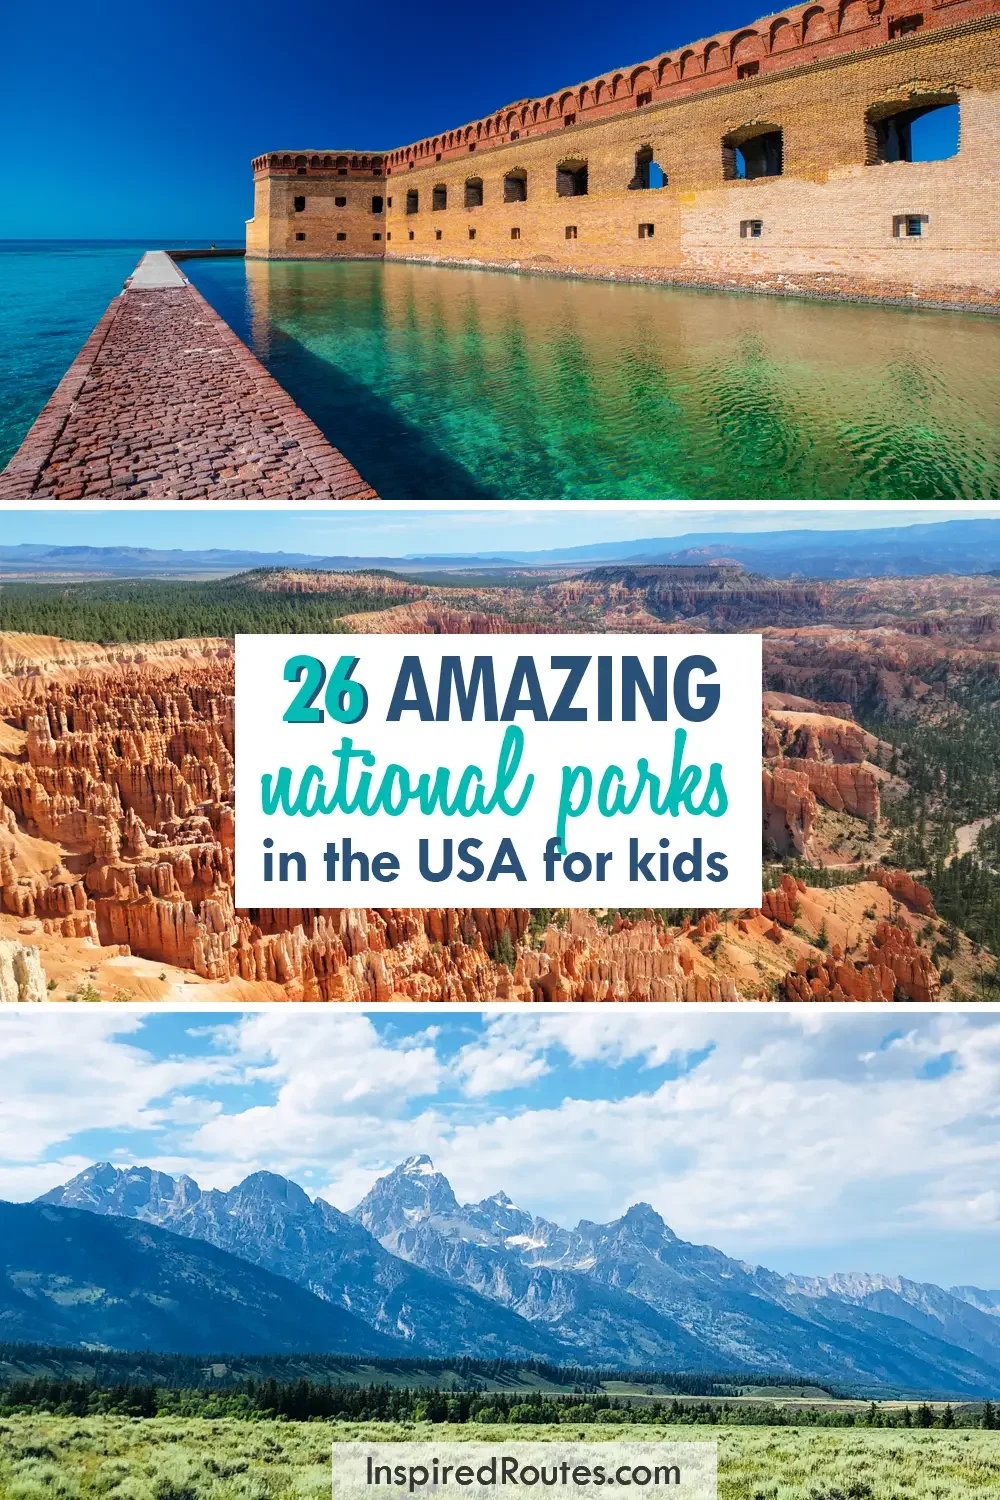 26 amazing national parks in the USA for kids view of brick path over water orange canyon and mountain scene